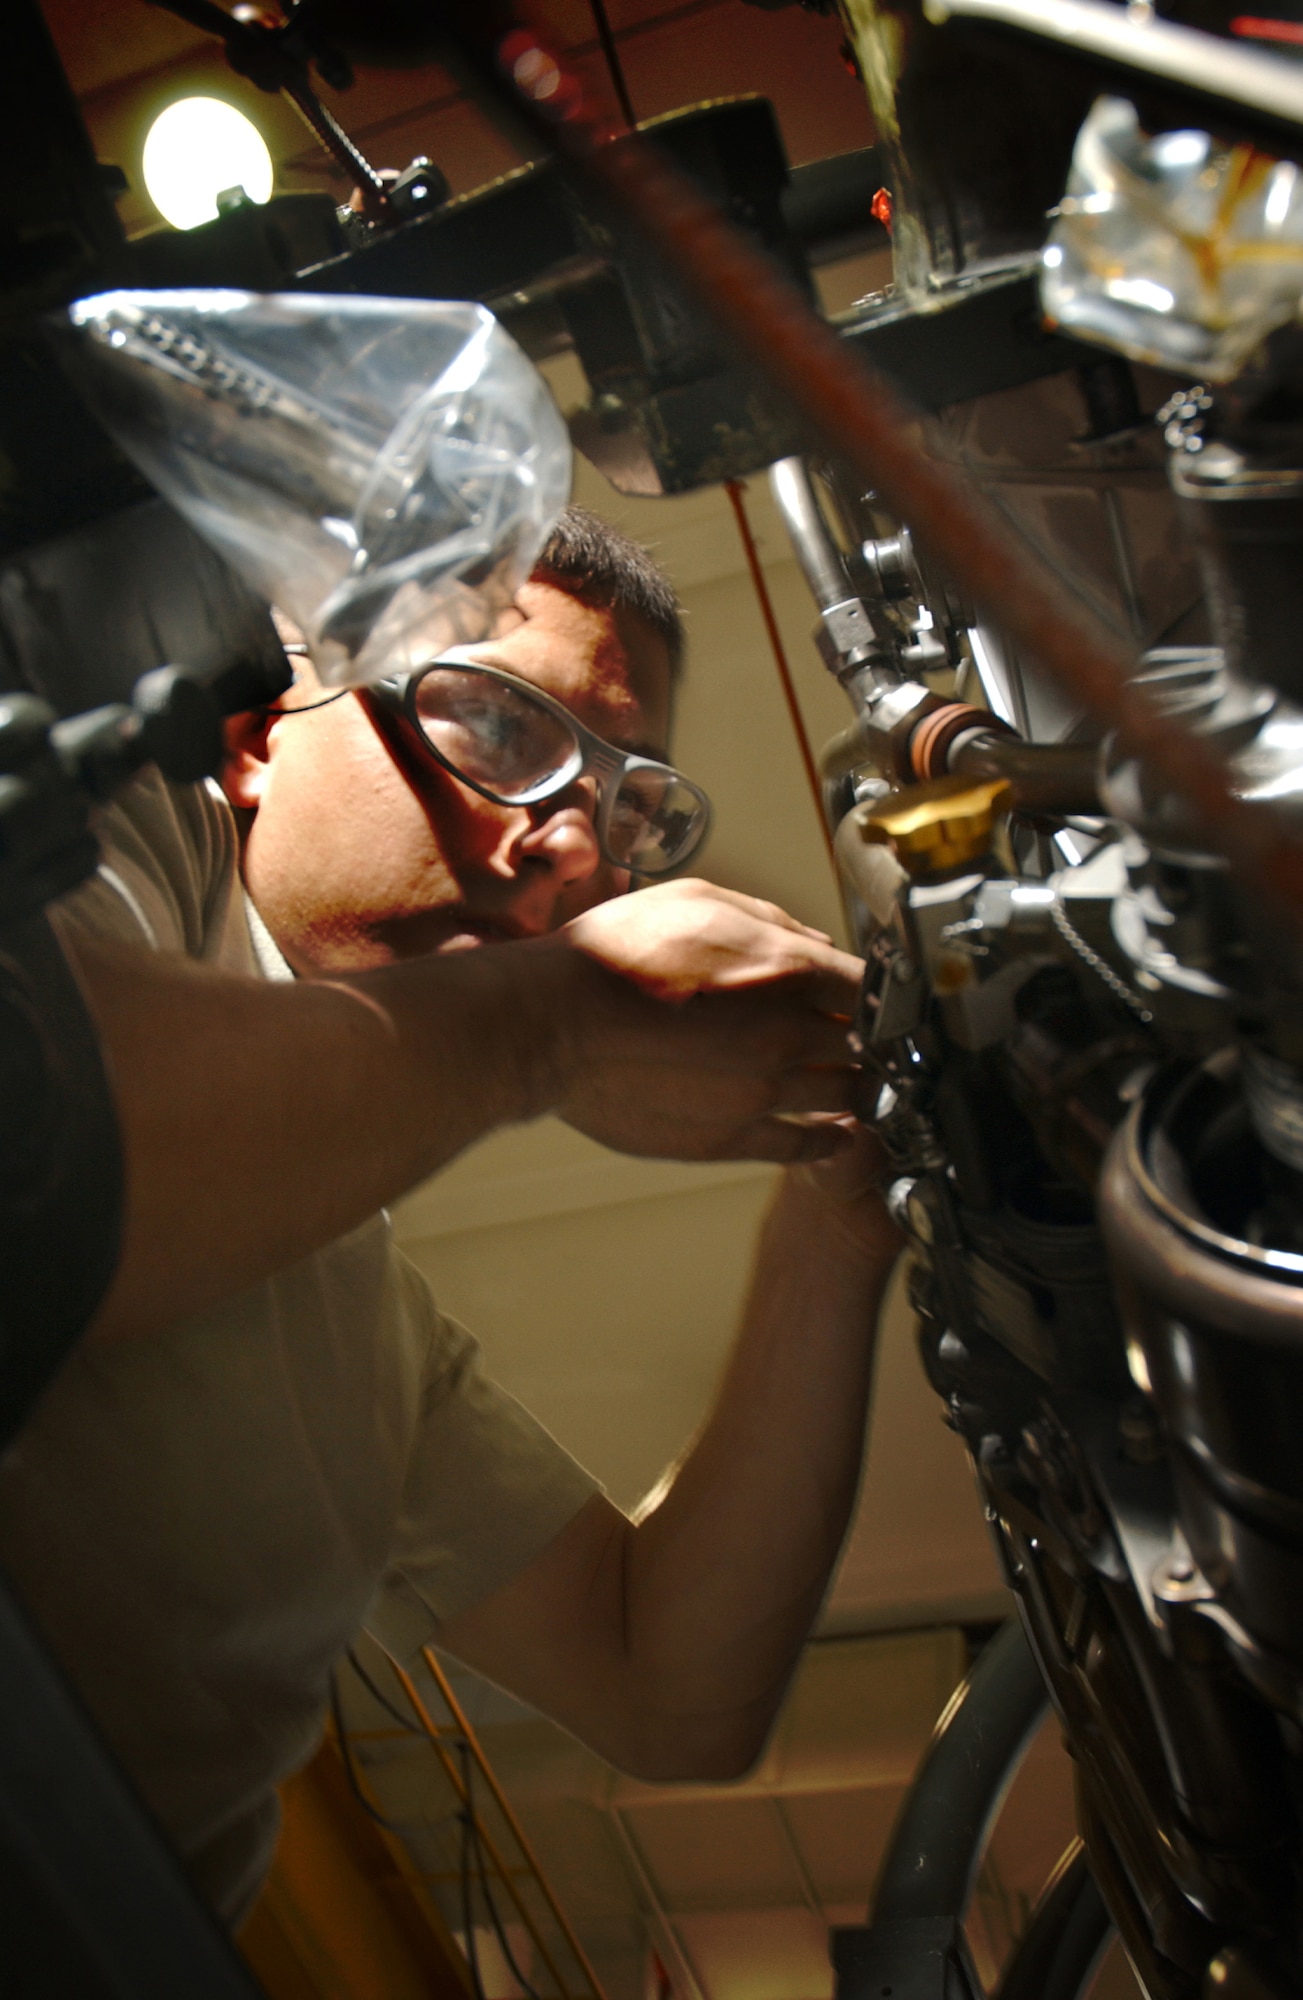 Airman 1st Class Paul Guajardo, 18th Component Maintenance Squadron Propulsion Flight, performs routine maintenance on the compression bleed cylinders of an F-15 during the 2008 Pacific Air Forces Operational Readiness Inspection at Kadena Air Base, Japan, March 10, 2008. PACAF is conducting the inspection from March 9 to 15 to validate the mission readiness of the 18th Wing.
(U.S. Air Force photo/Senior Airman Jeremy McGuffin)